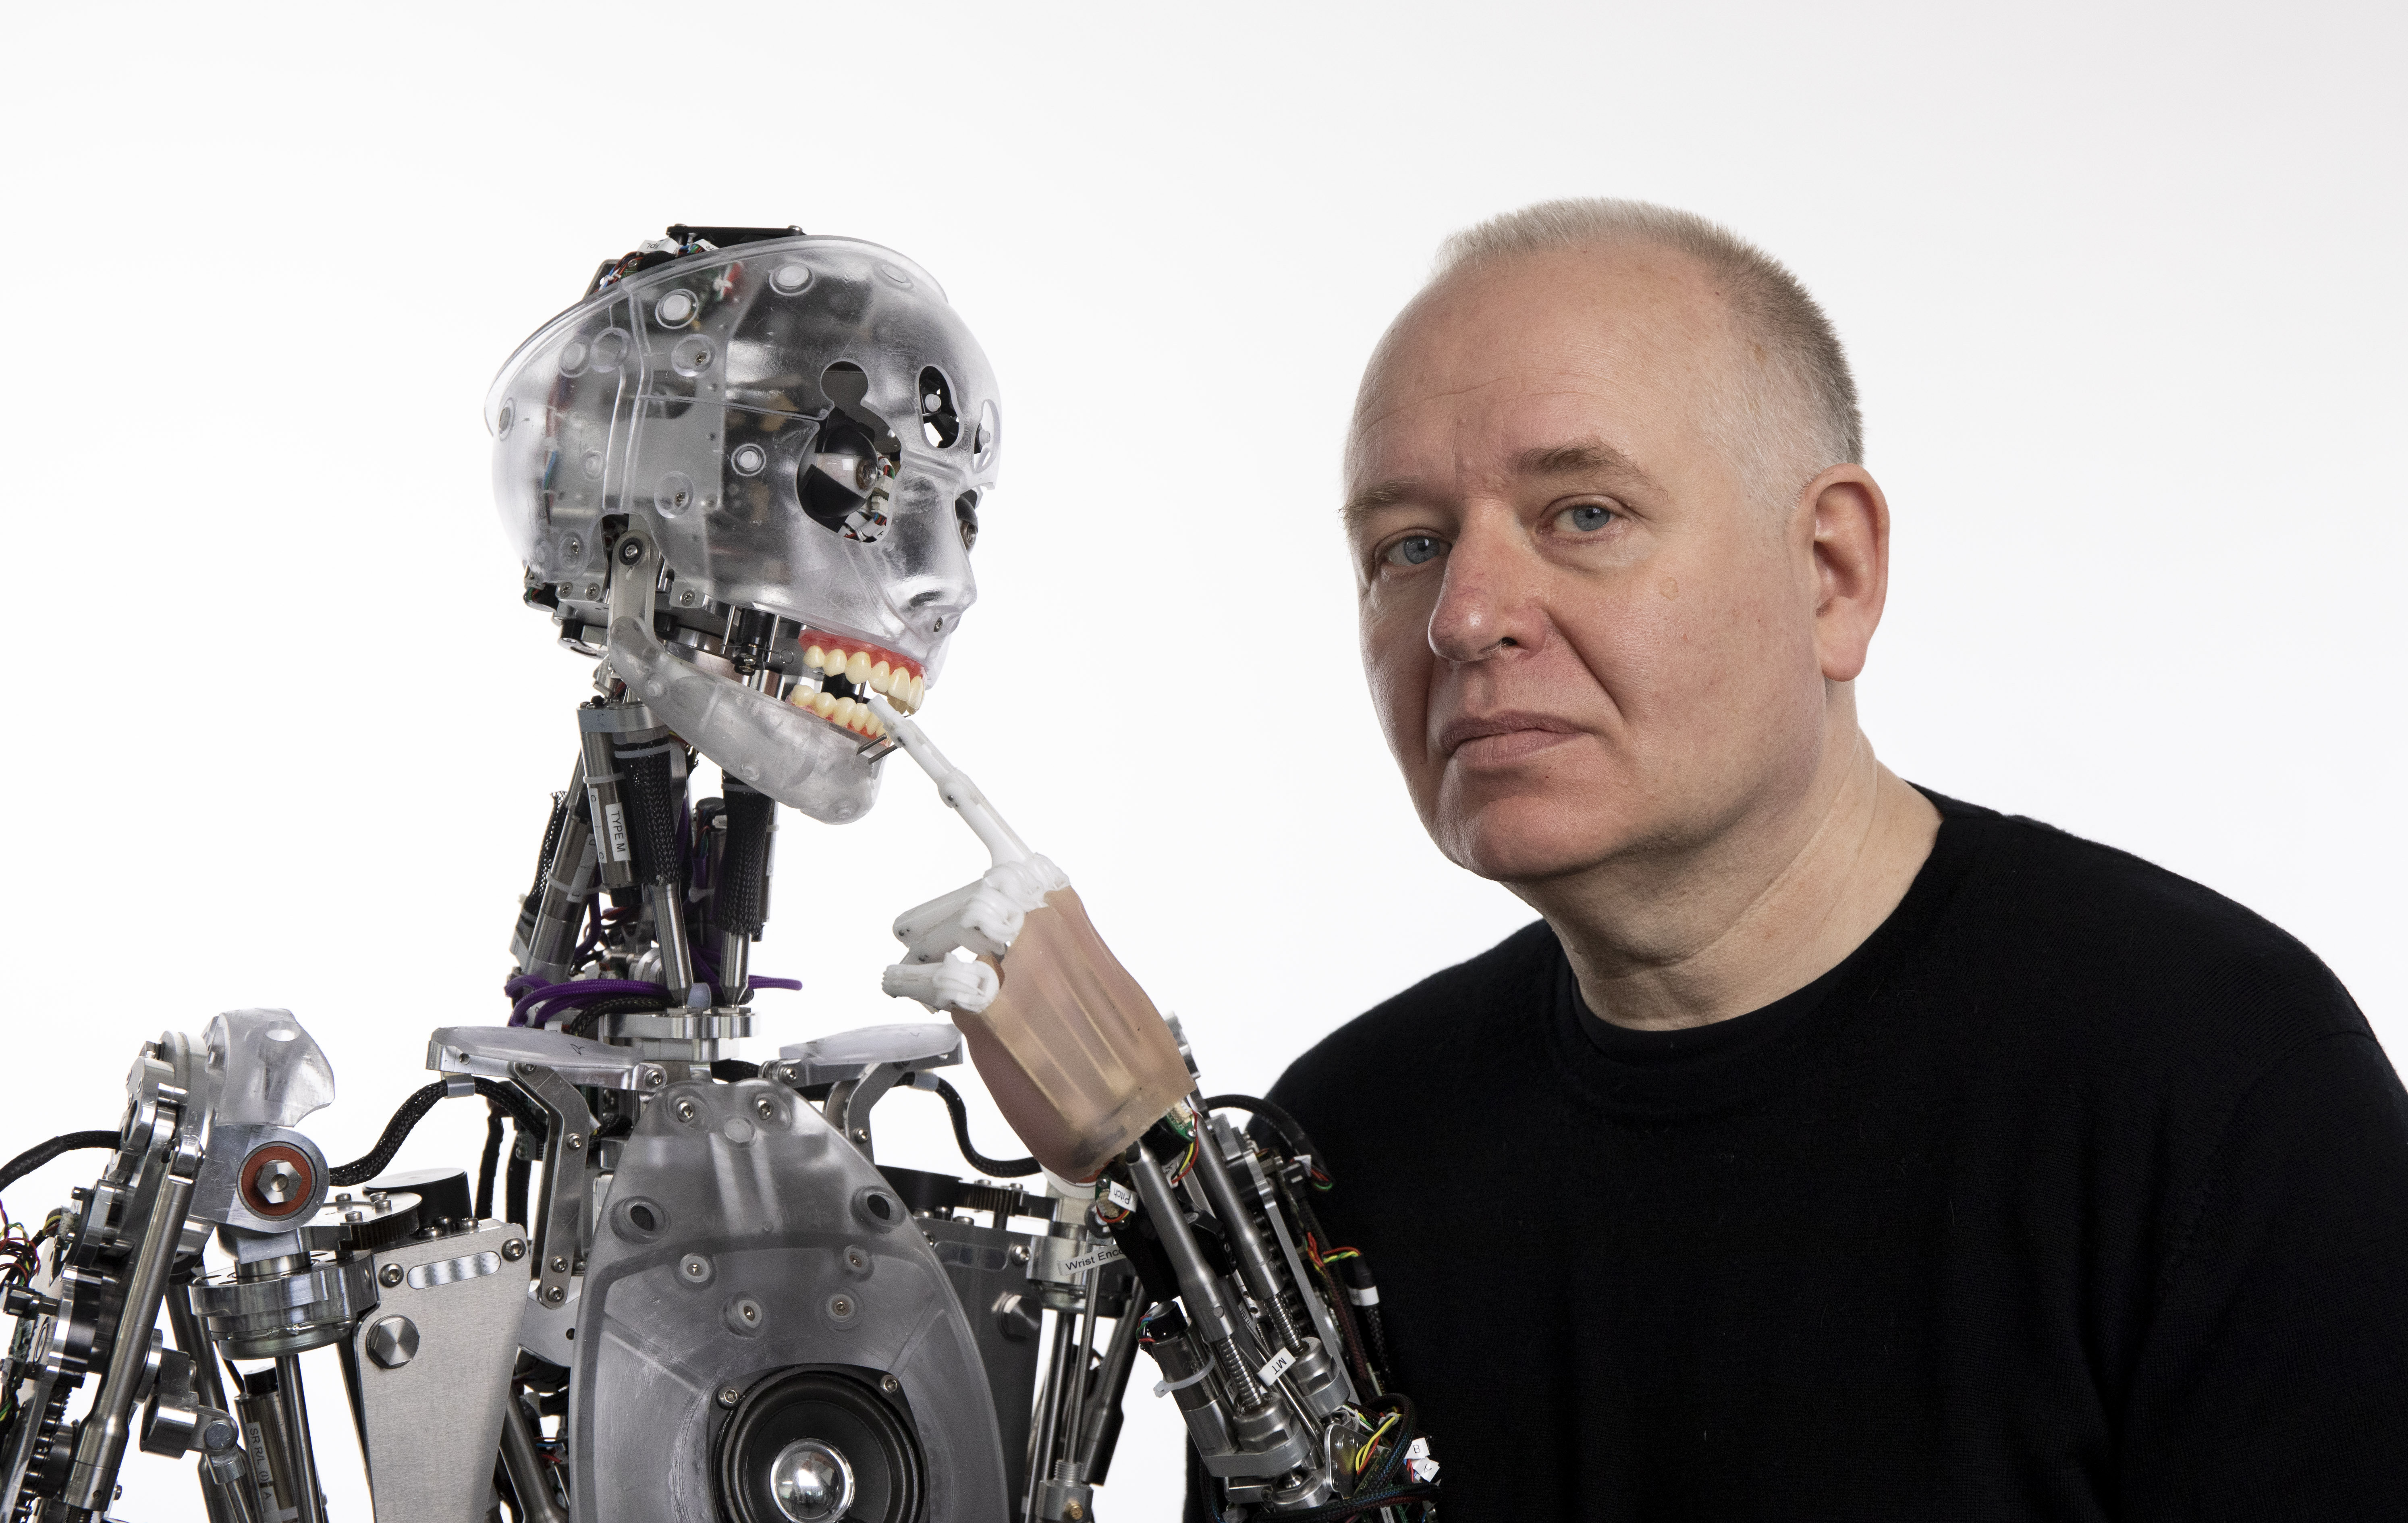 Engineered Arts founder Will Jackson and the Mesmer-series robot